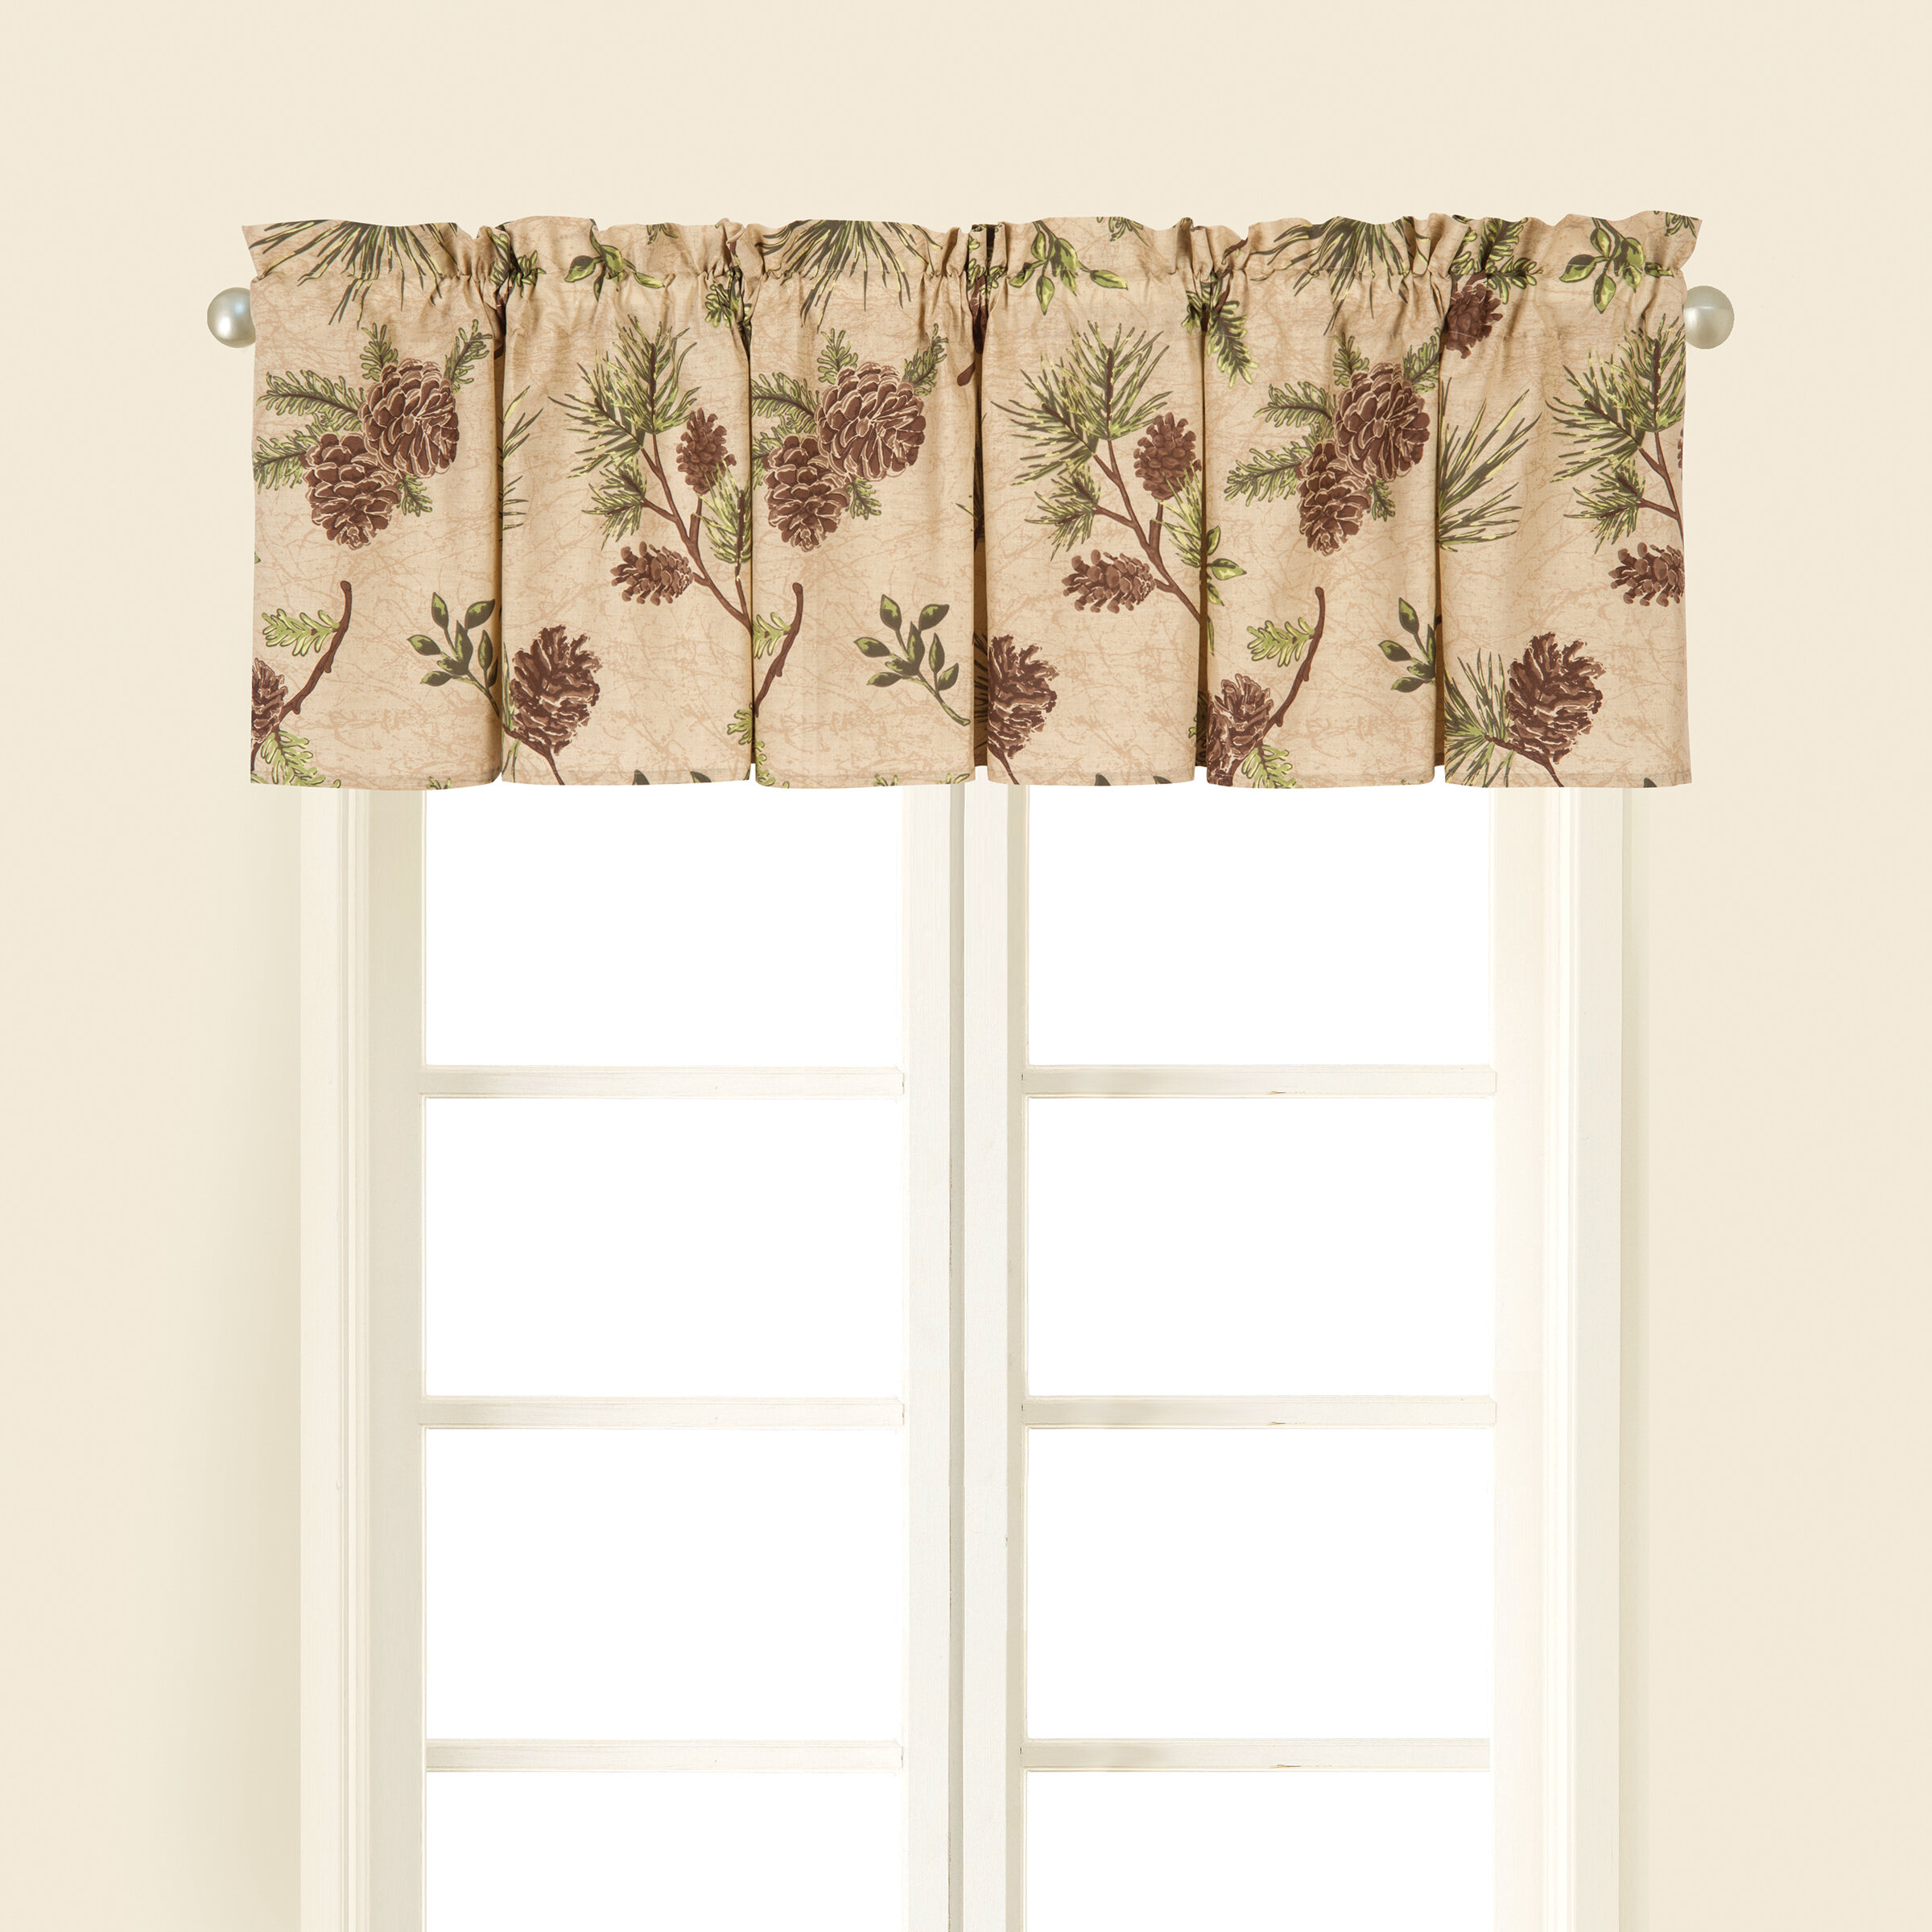 Details about   New Mary Jane's Farm Watercolor Floral Valance Window Treatment Green Farmhouse 